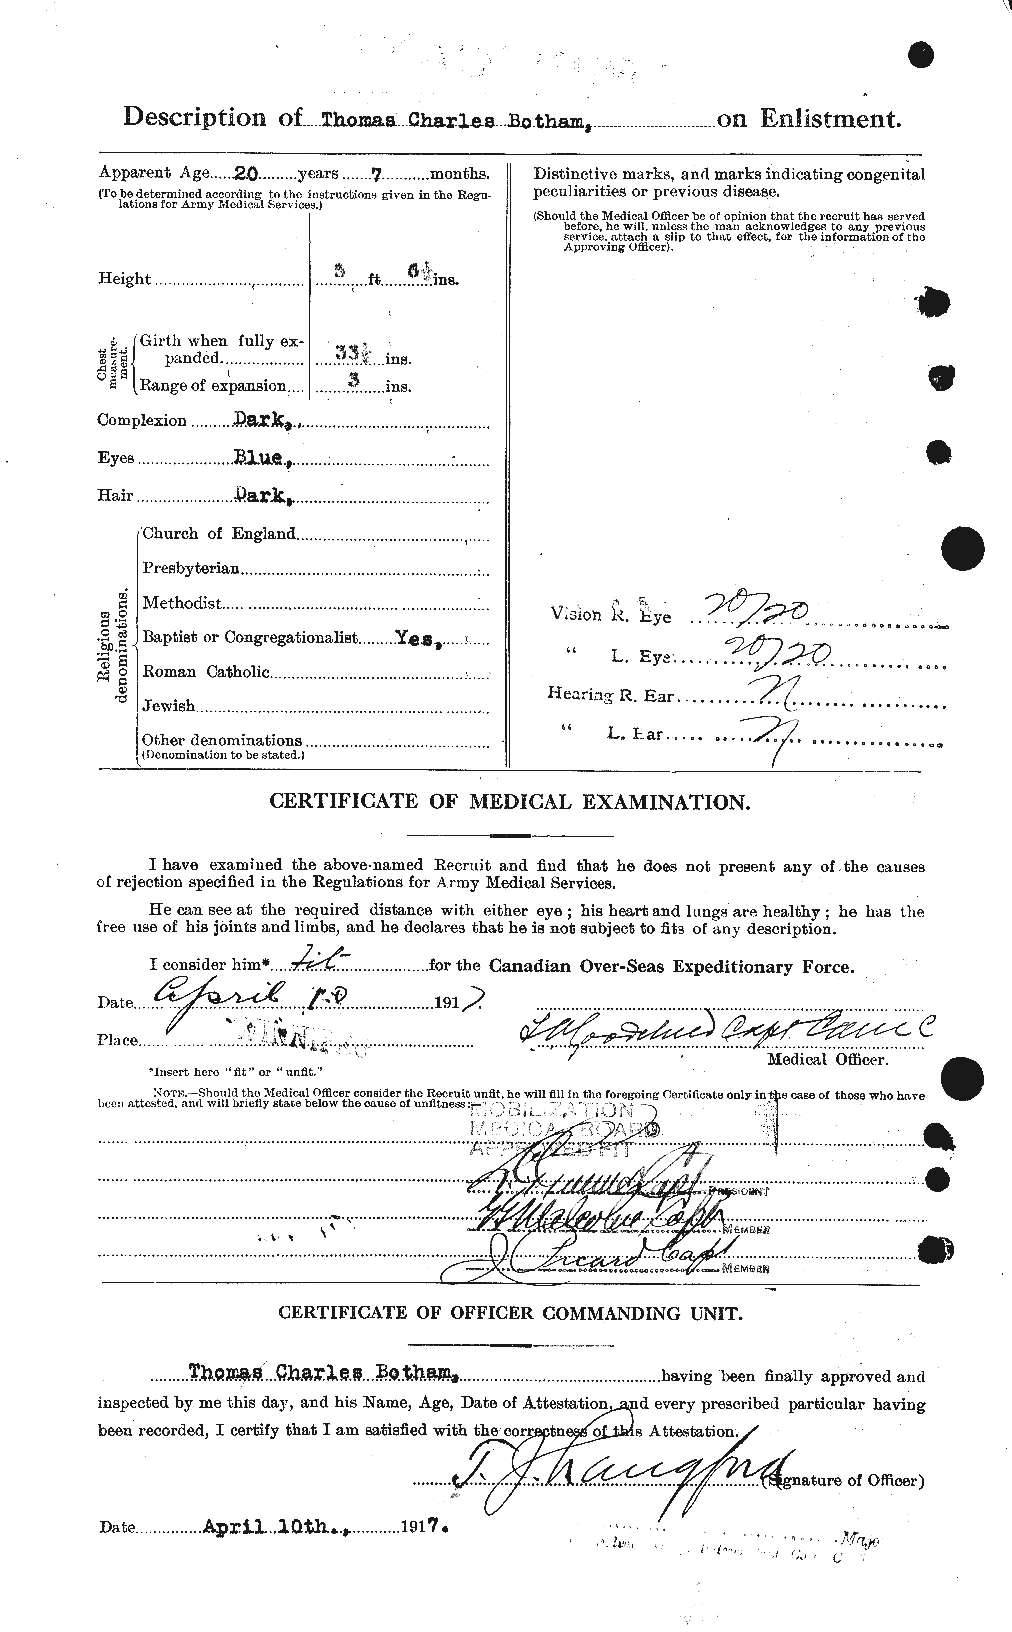 Personnel Records of the First World War - CEF 251997b